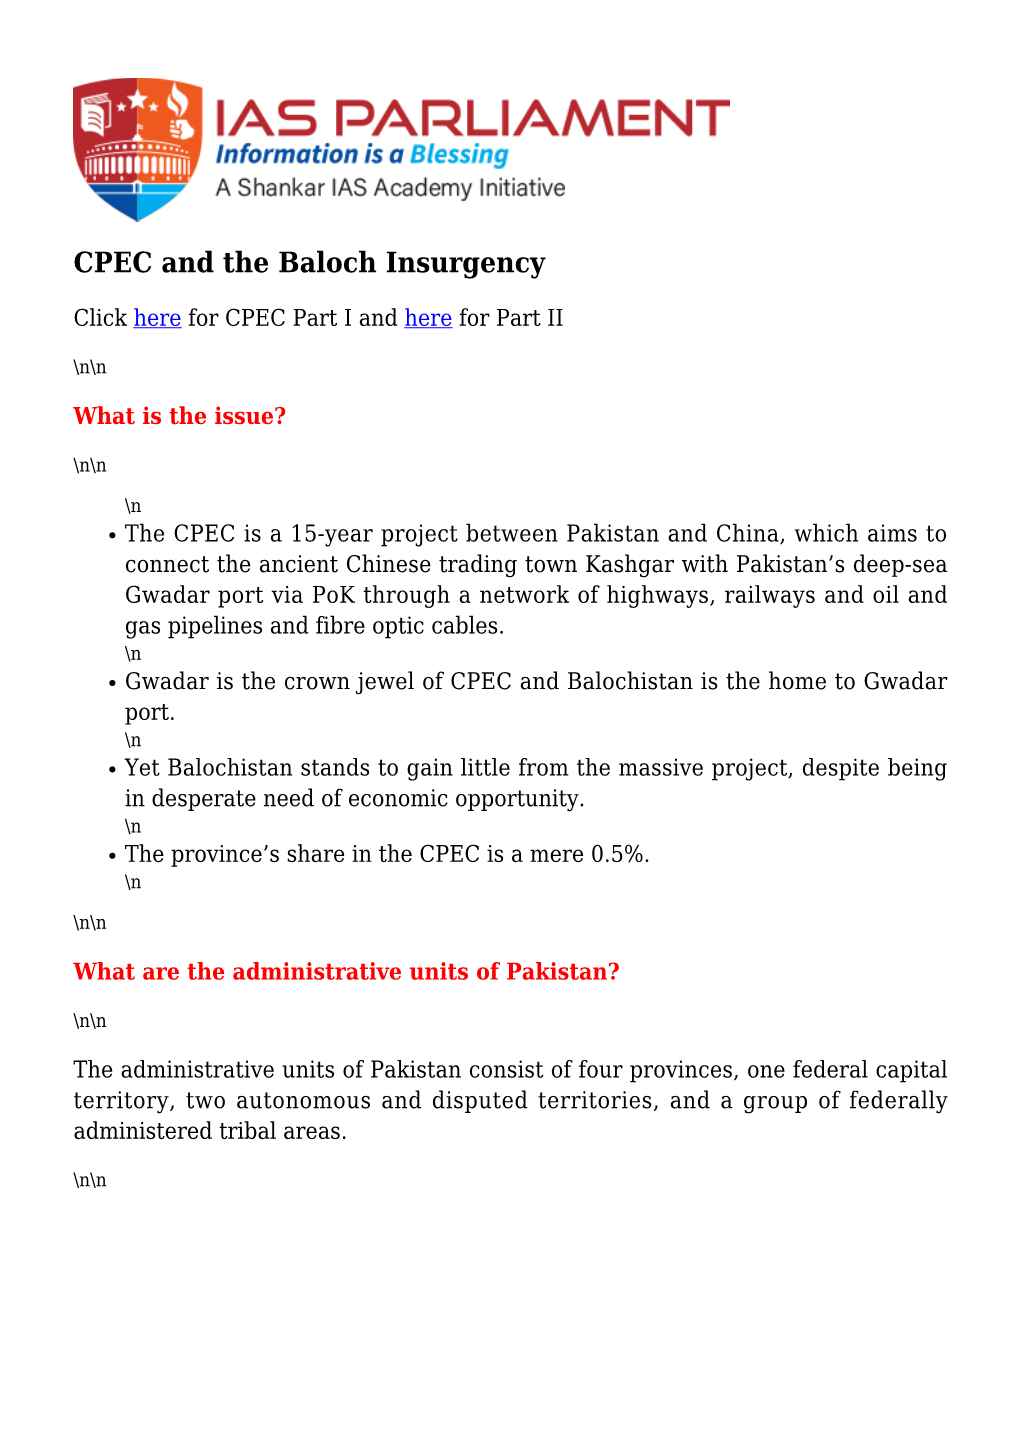 CPEC and the Baloch Insurgency